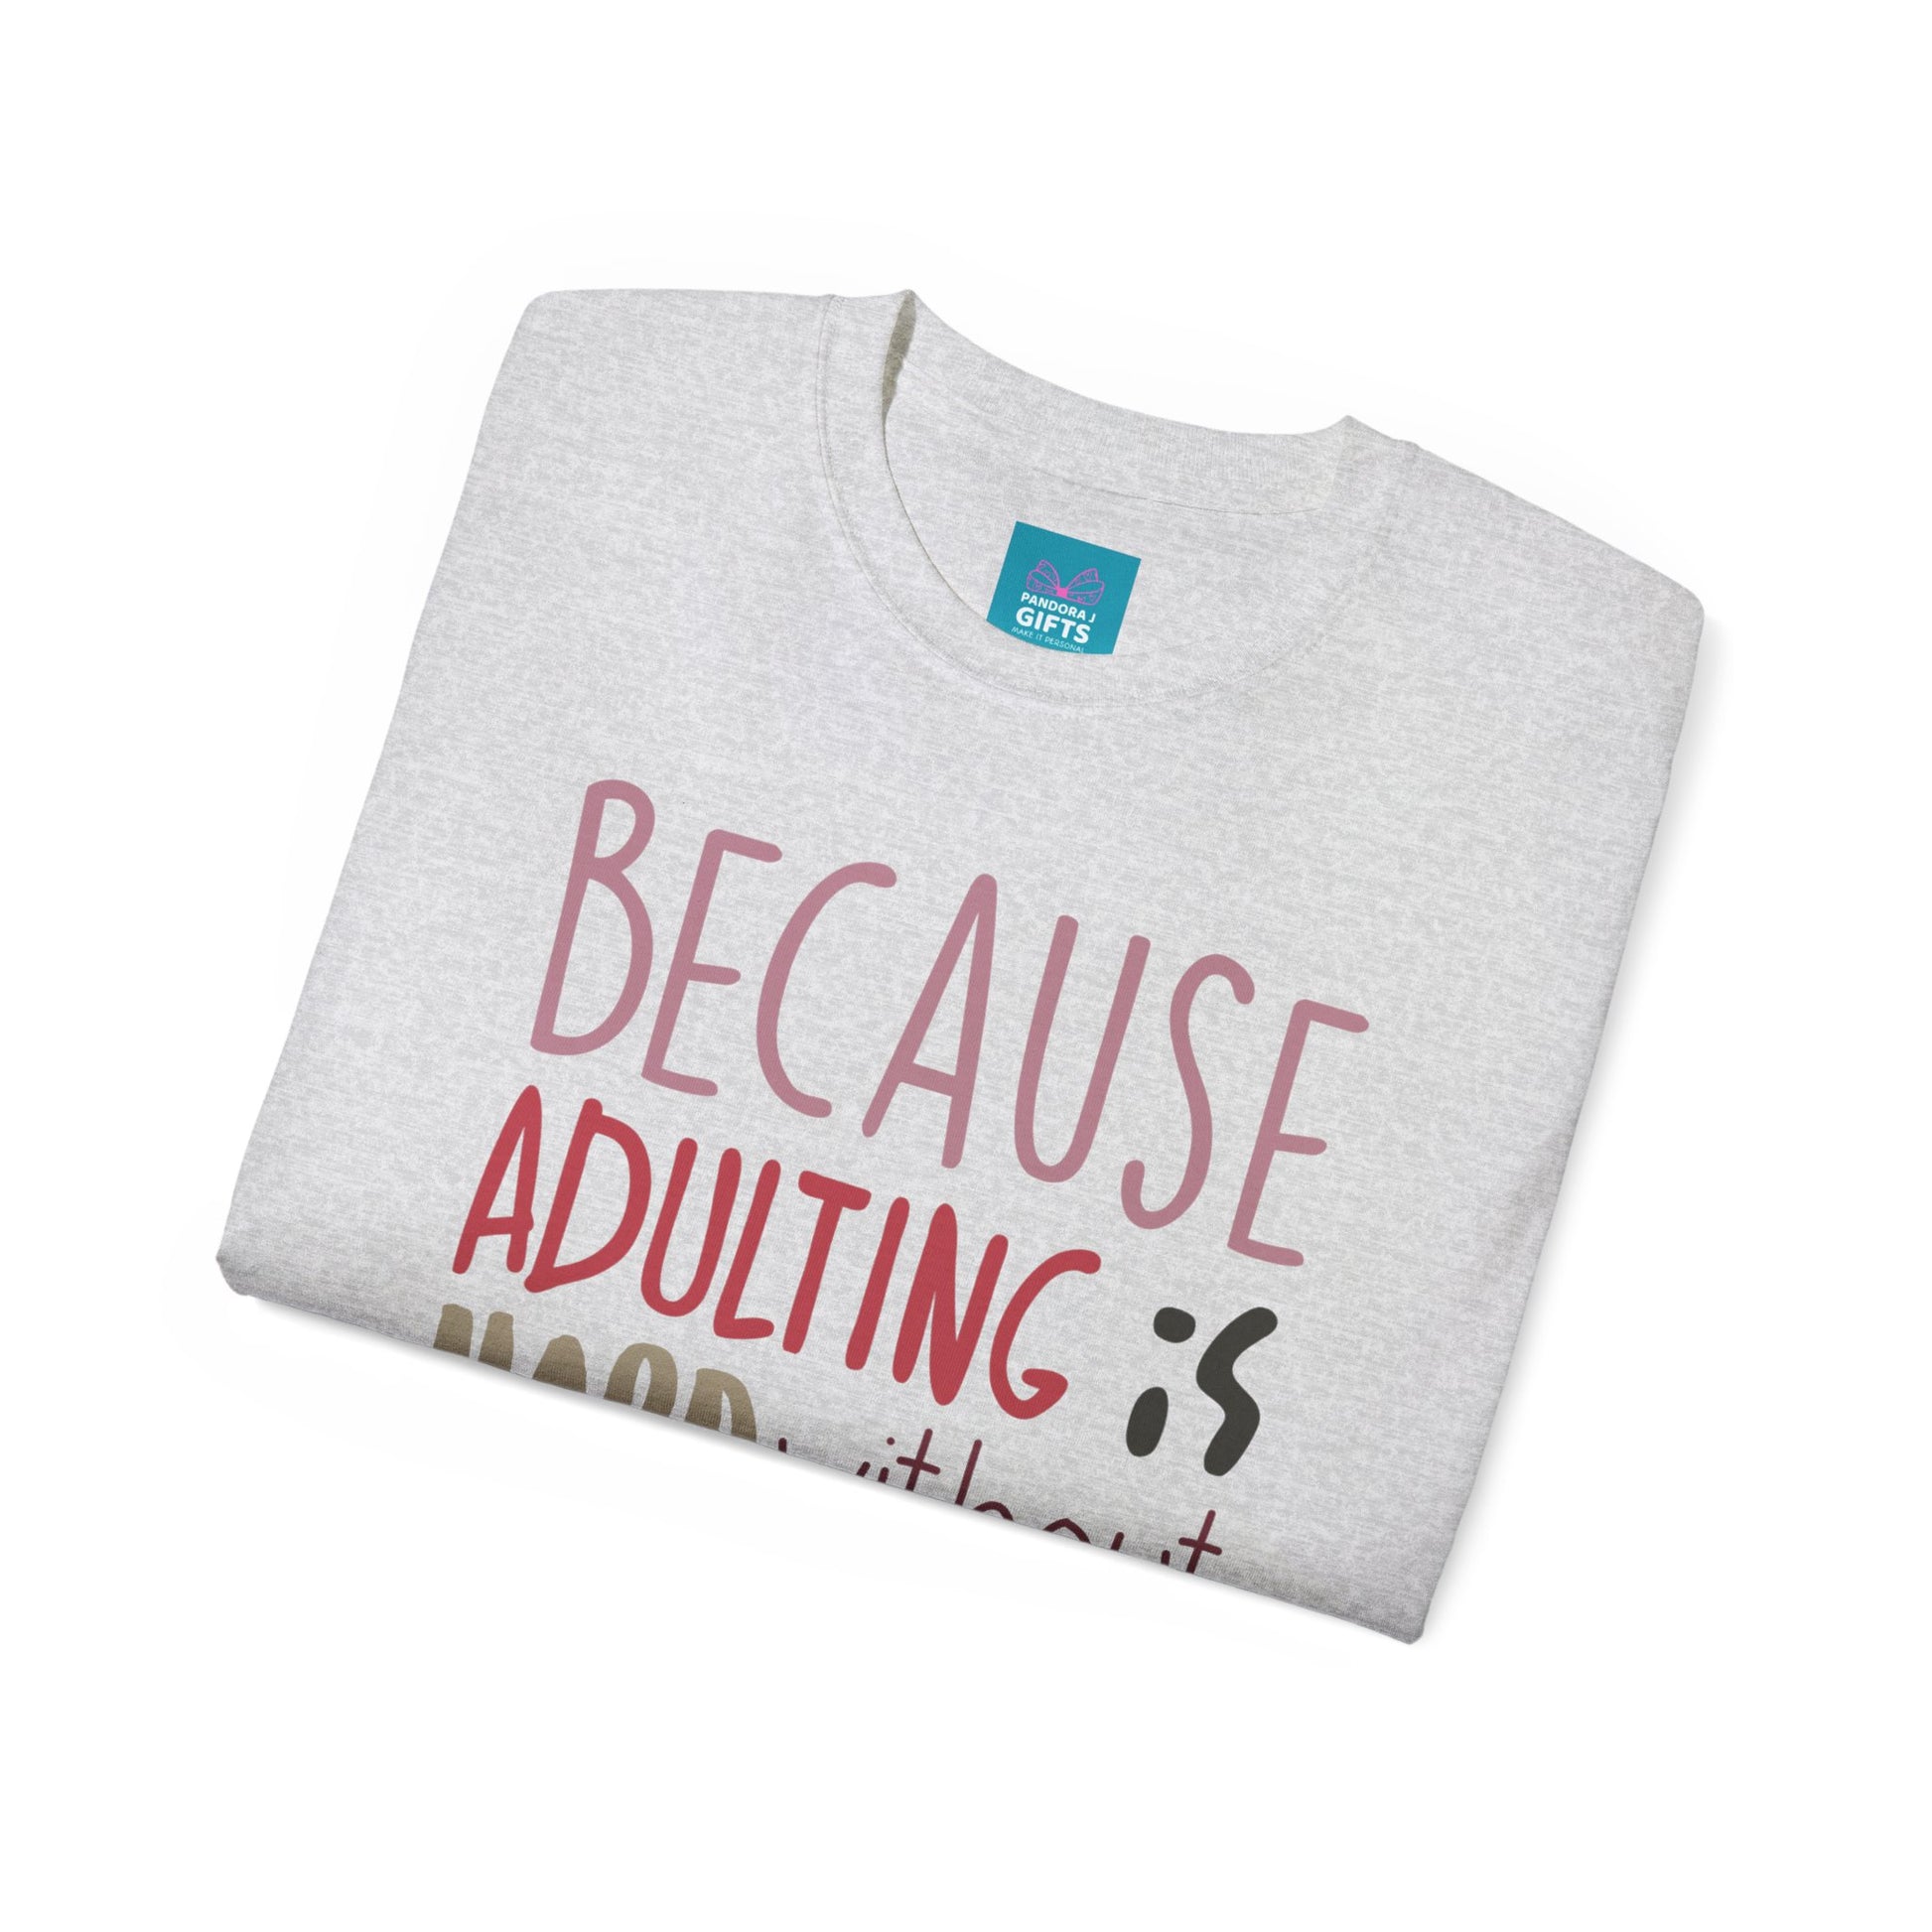 folded heather shirt with words "Because Adulting is Hard without Jesus"